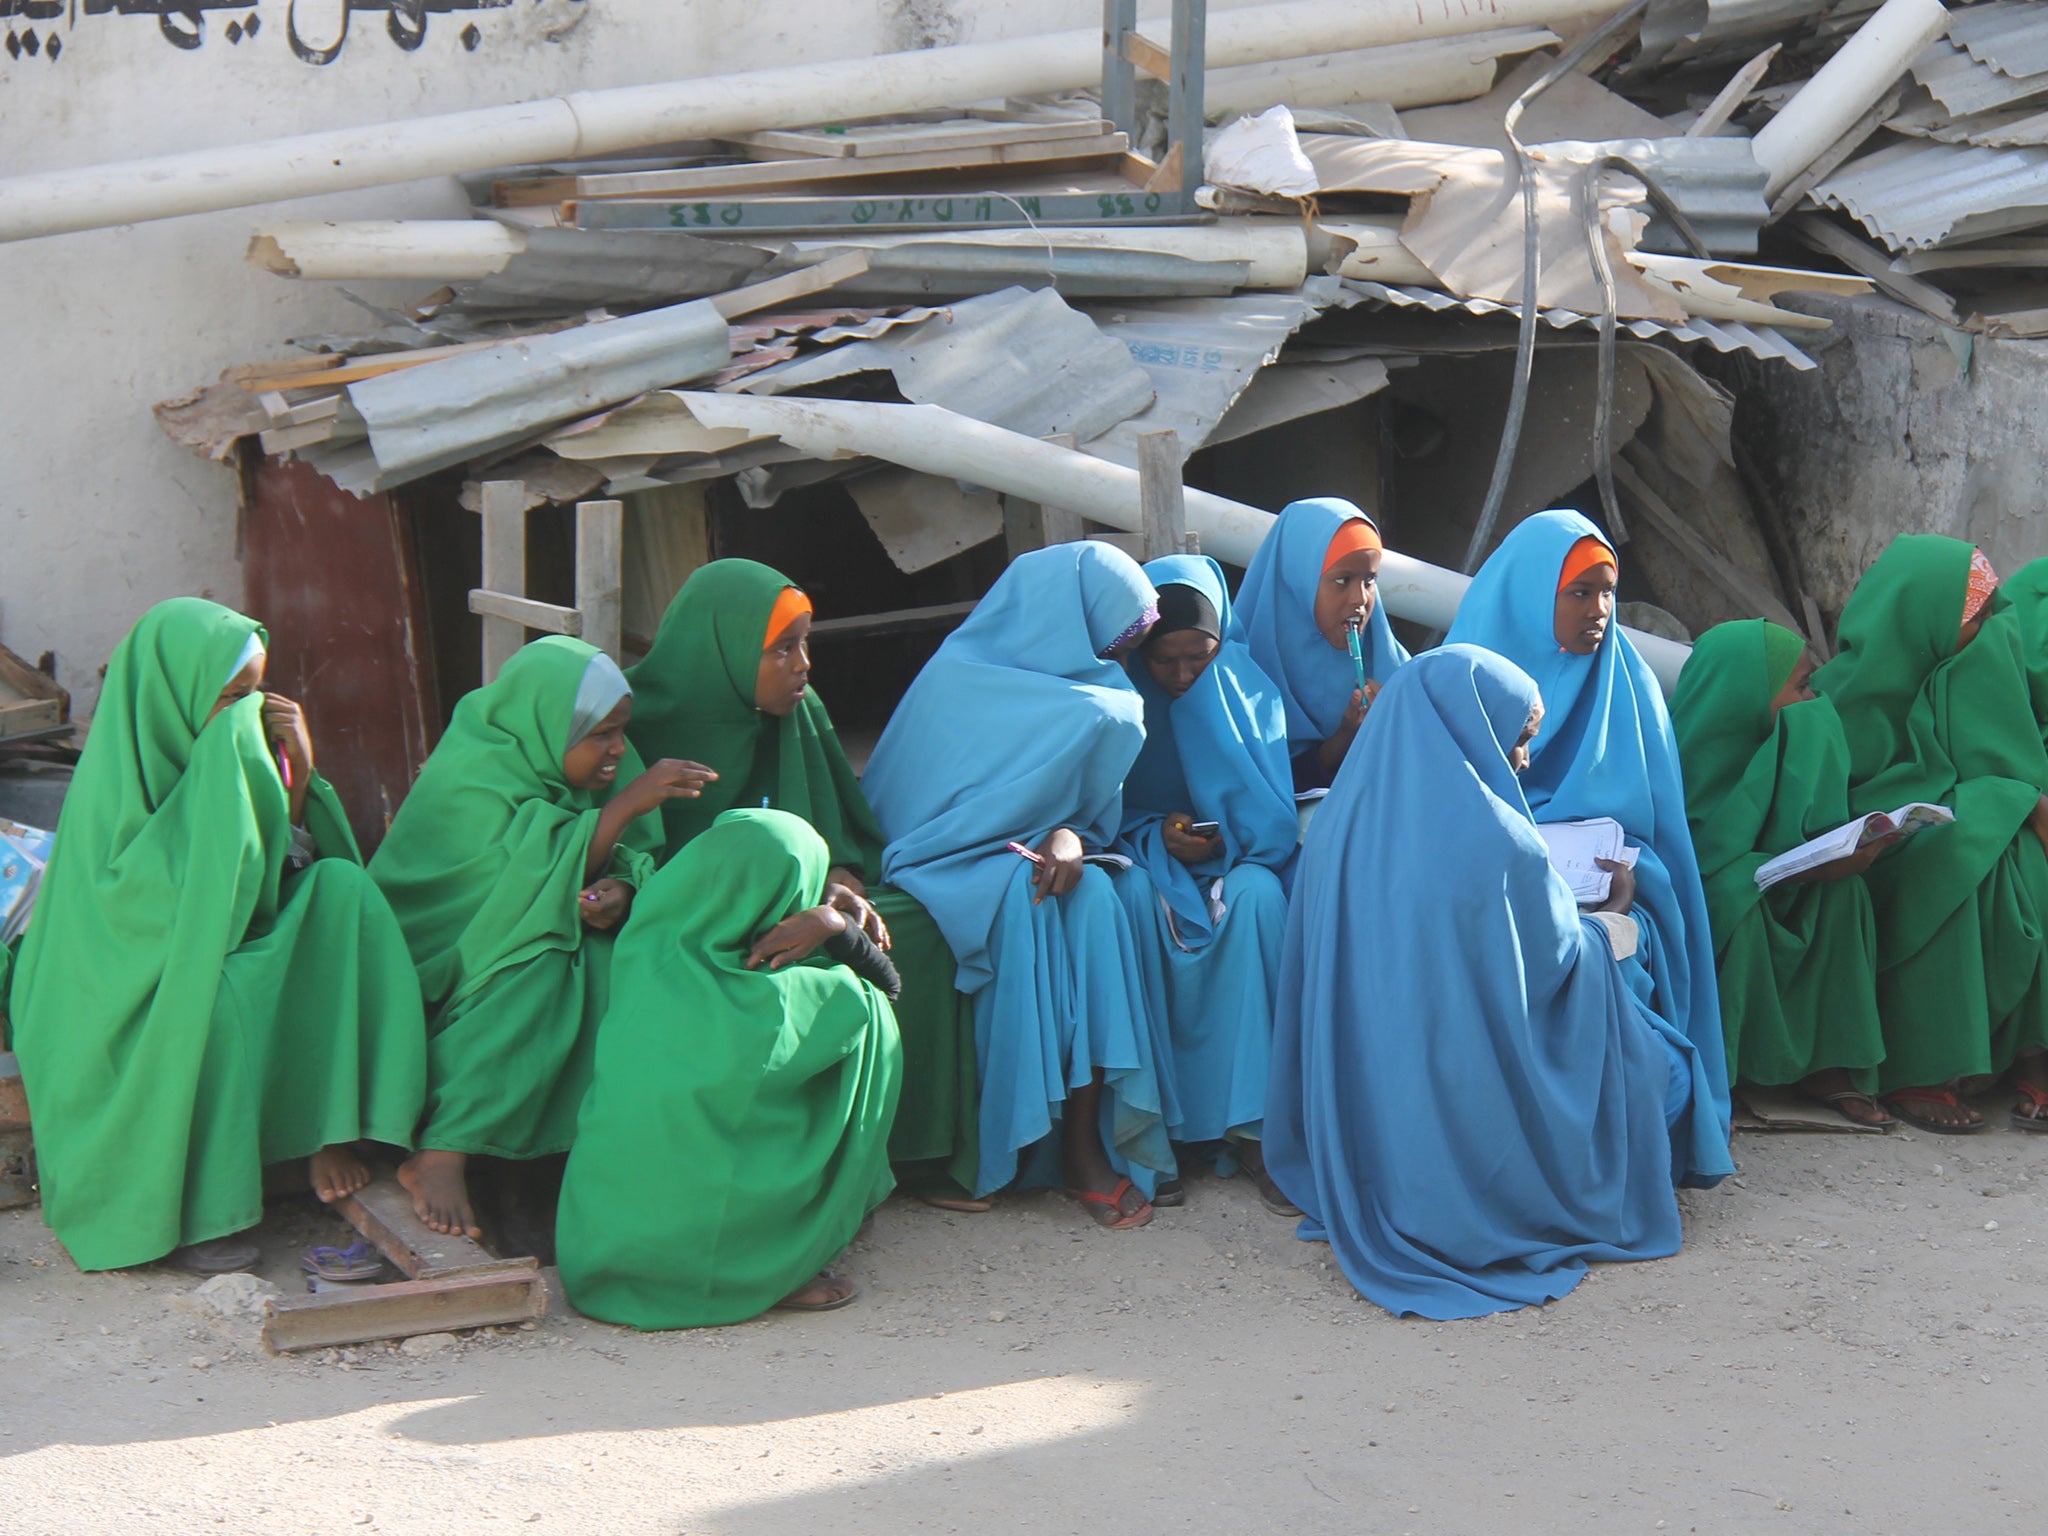 Young girls in Somalia. An estimated 98 per cent of women and girls aged 15-49 in the country have been cut